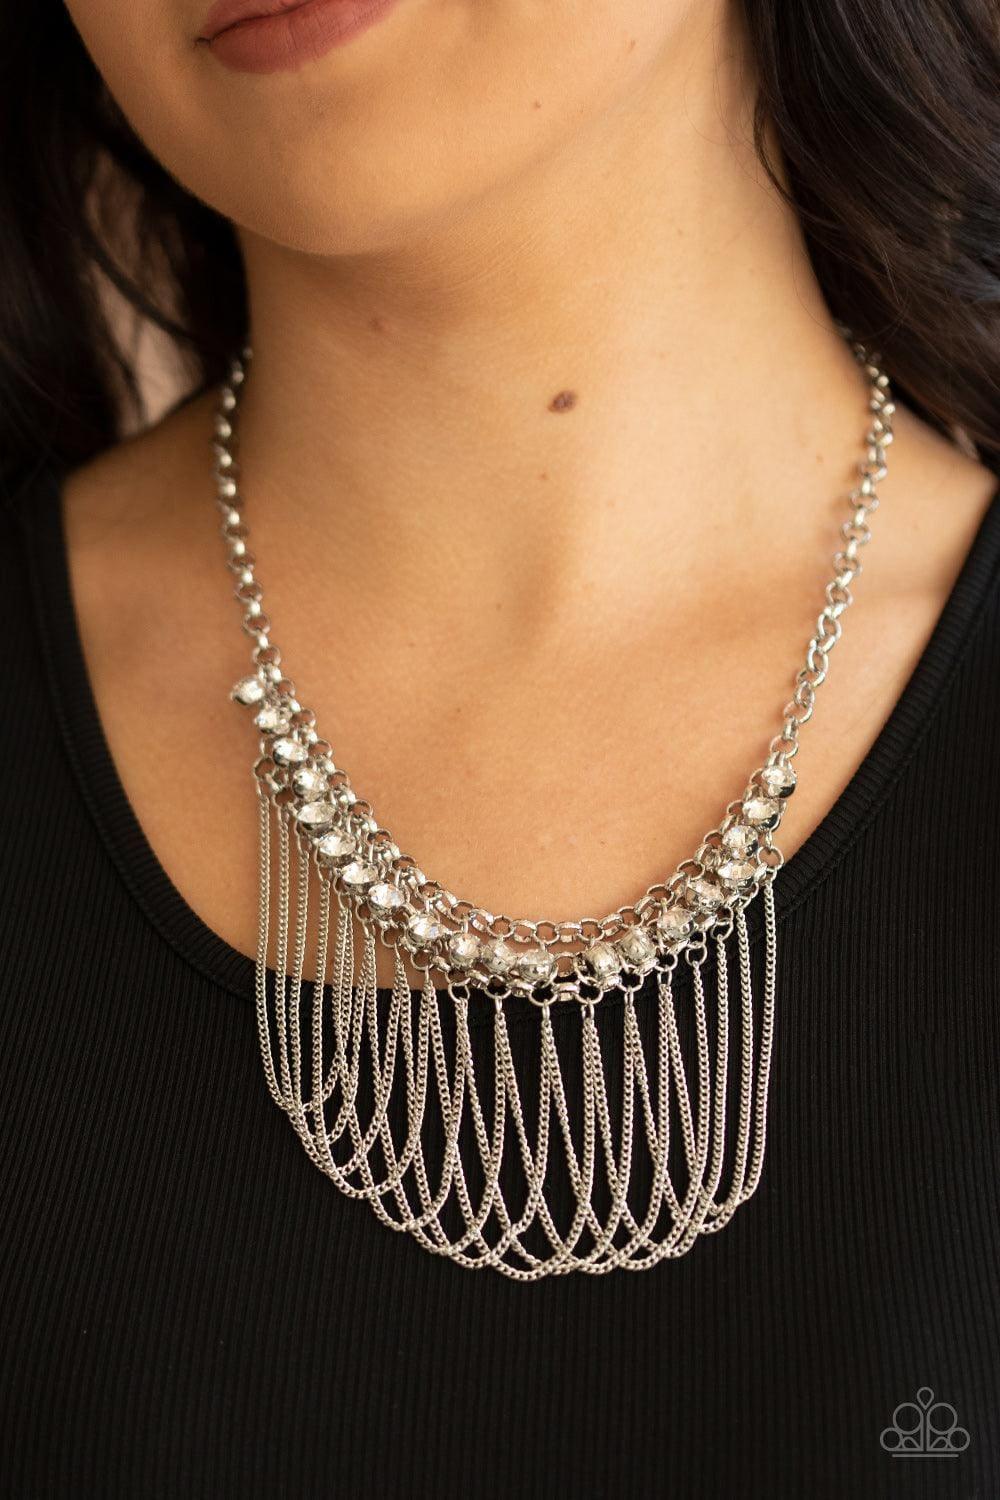 Paparazzi Accessories - Flaunt Your Fringe - White Necklace - Bling by JessieK